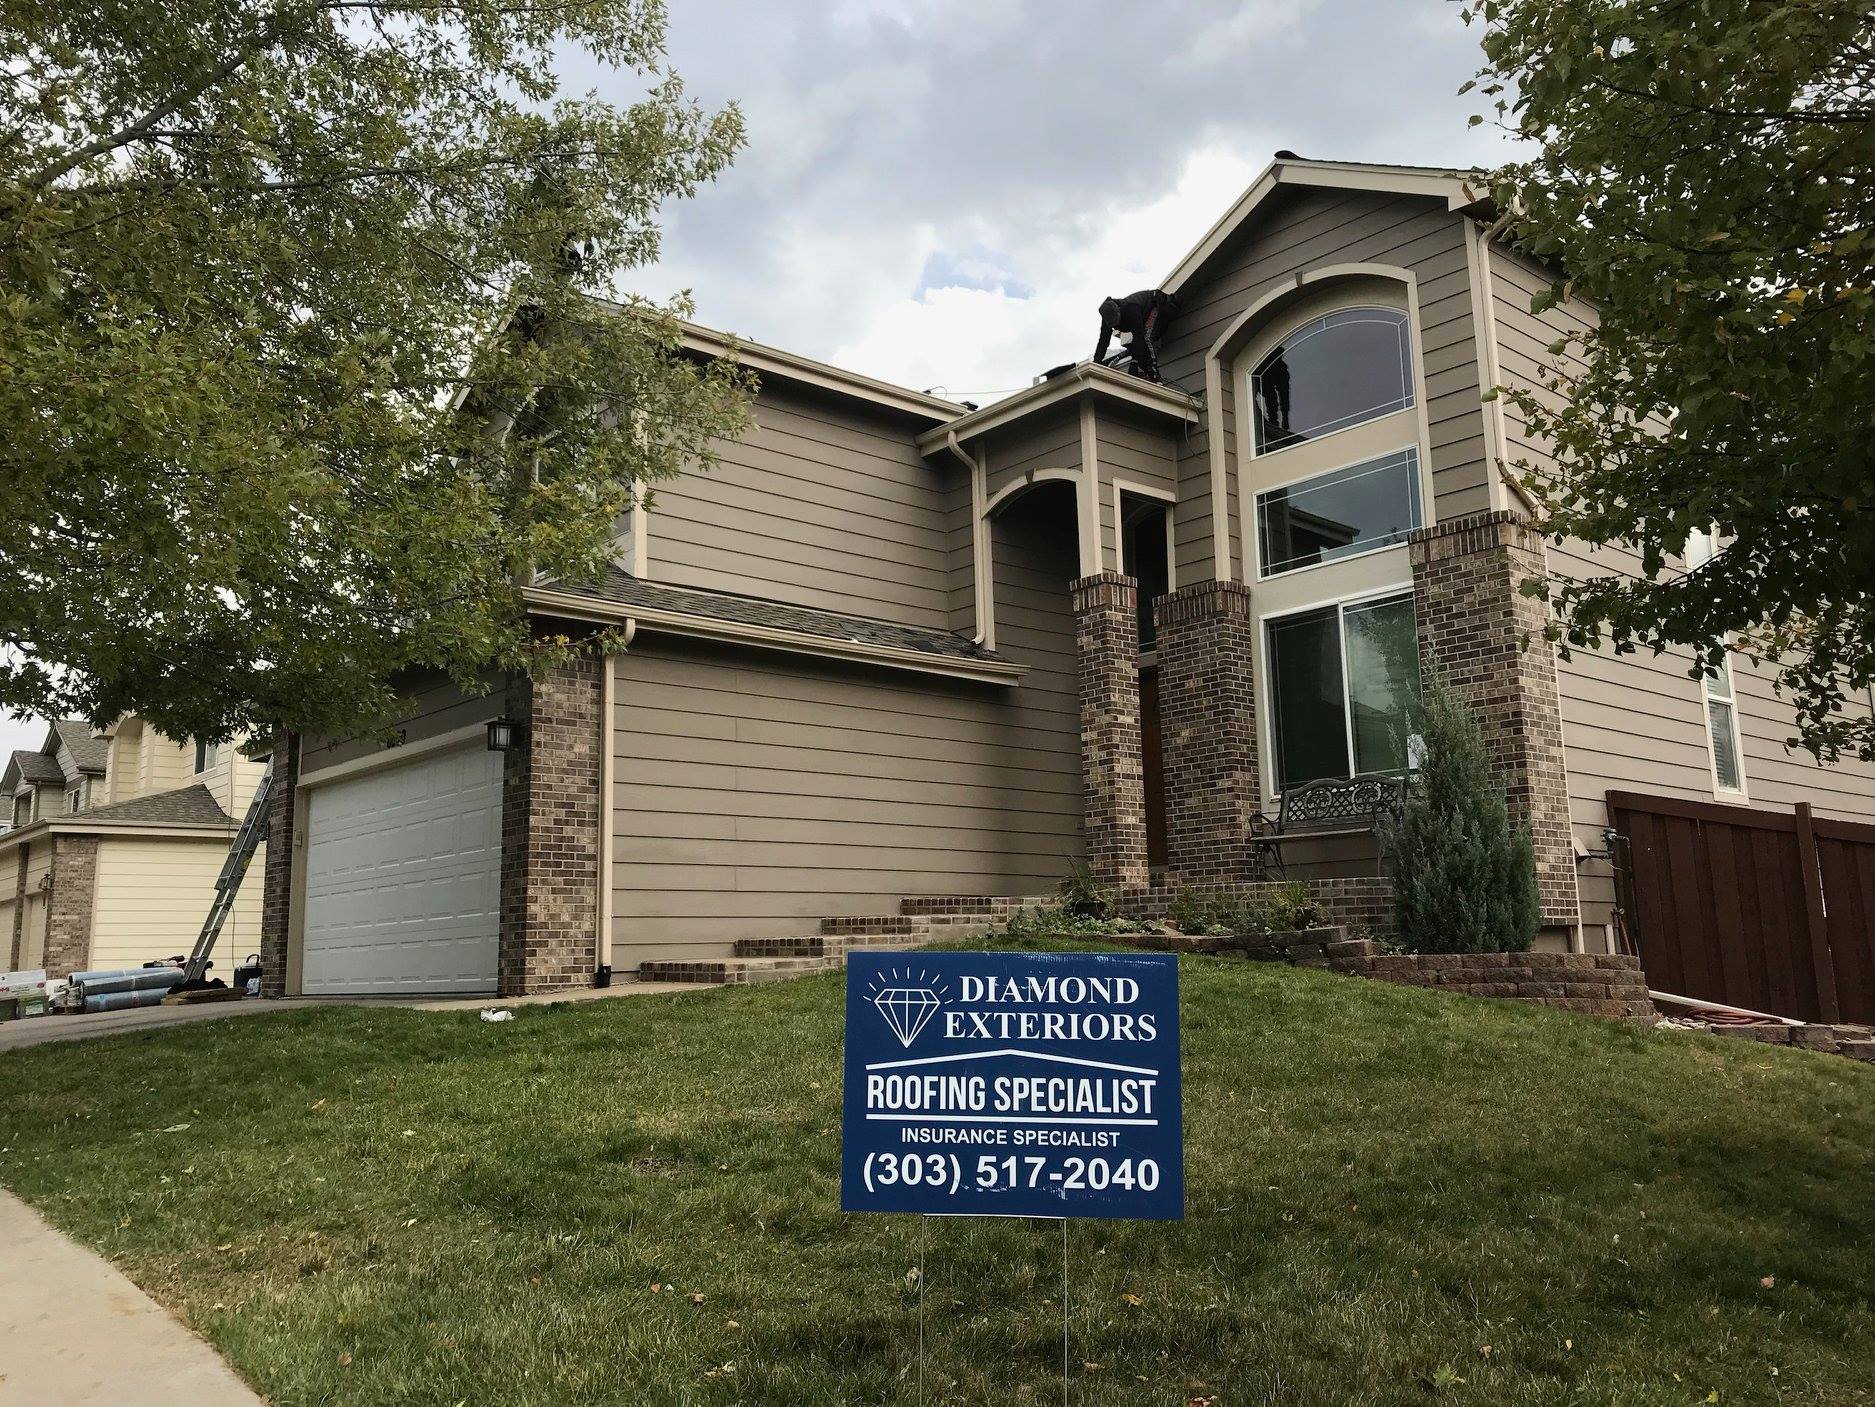 Castle Rock home with Diamond Exteriors yard sign from roofing projects